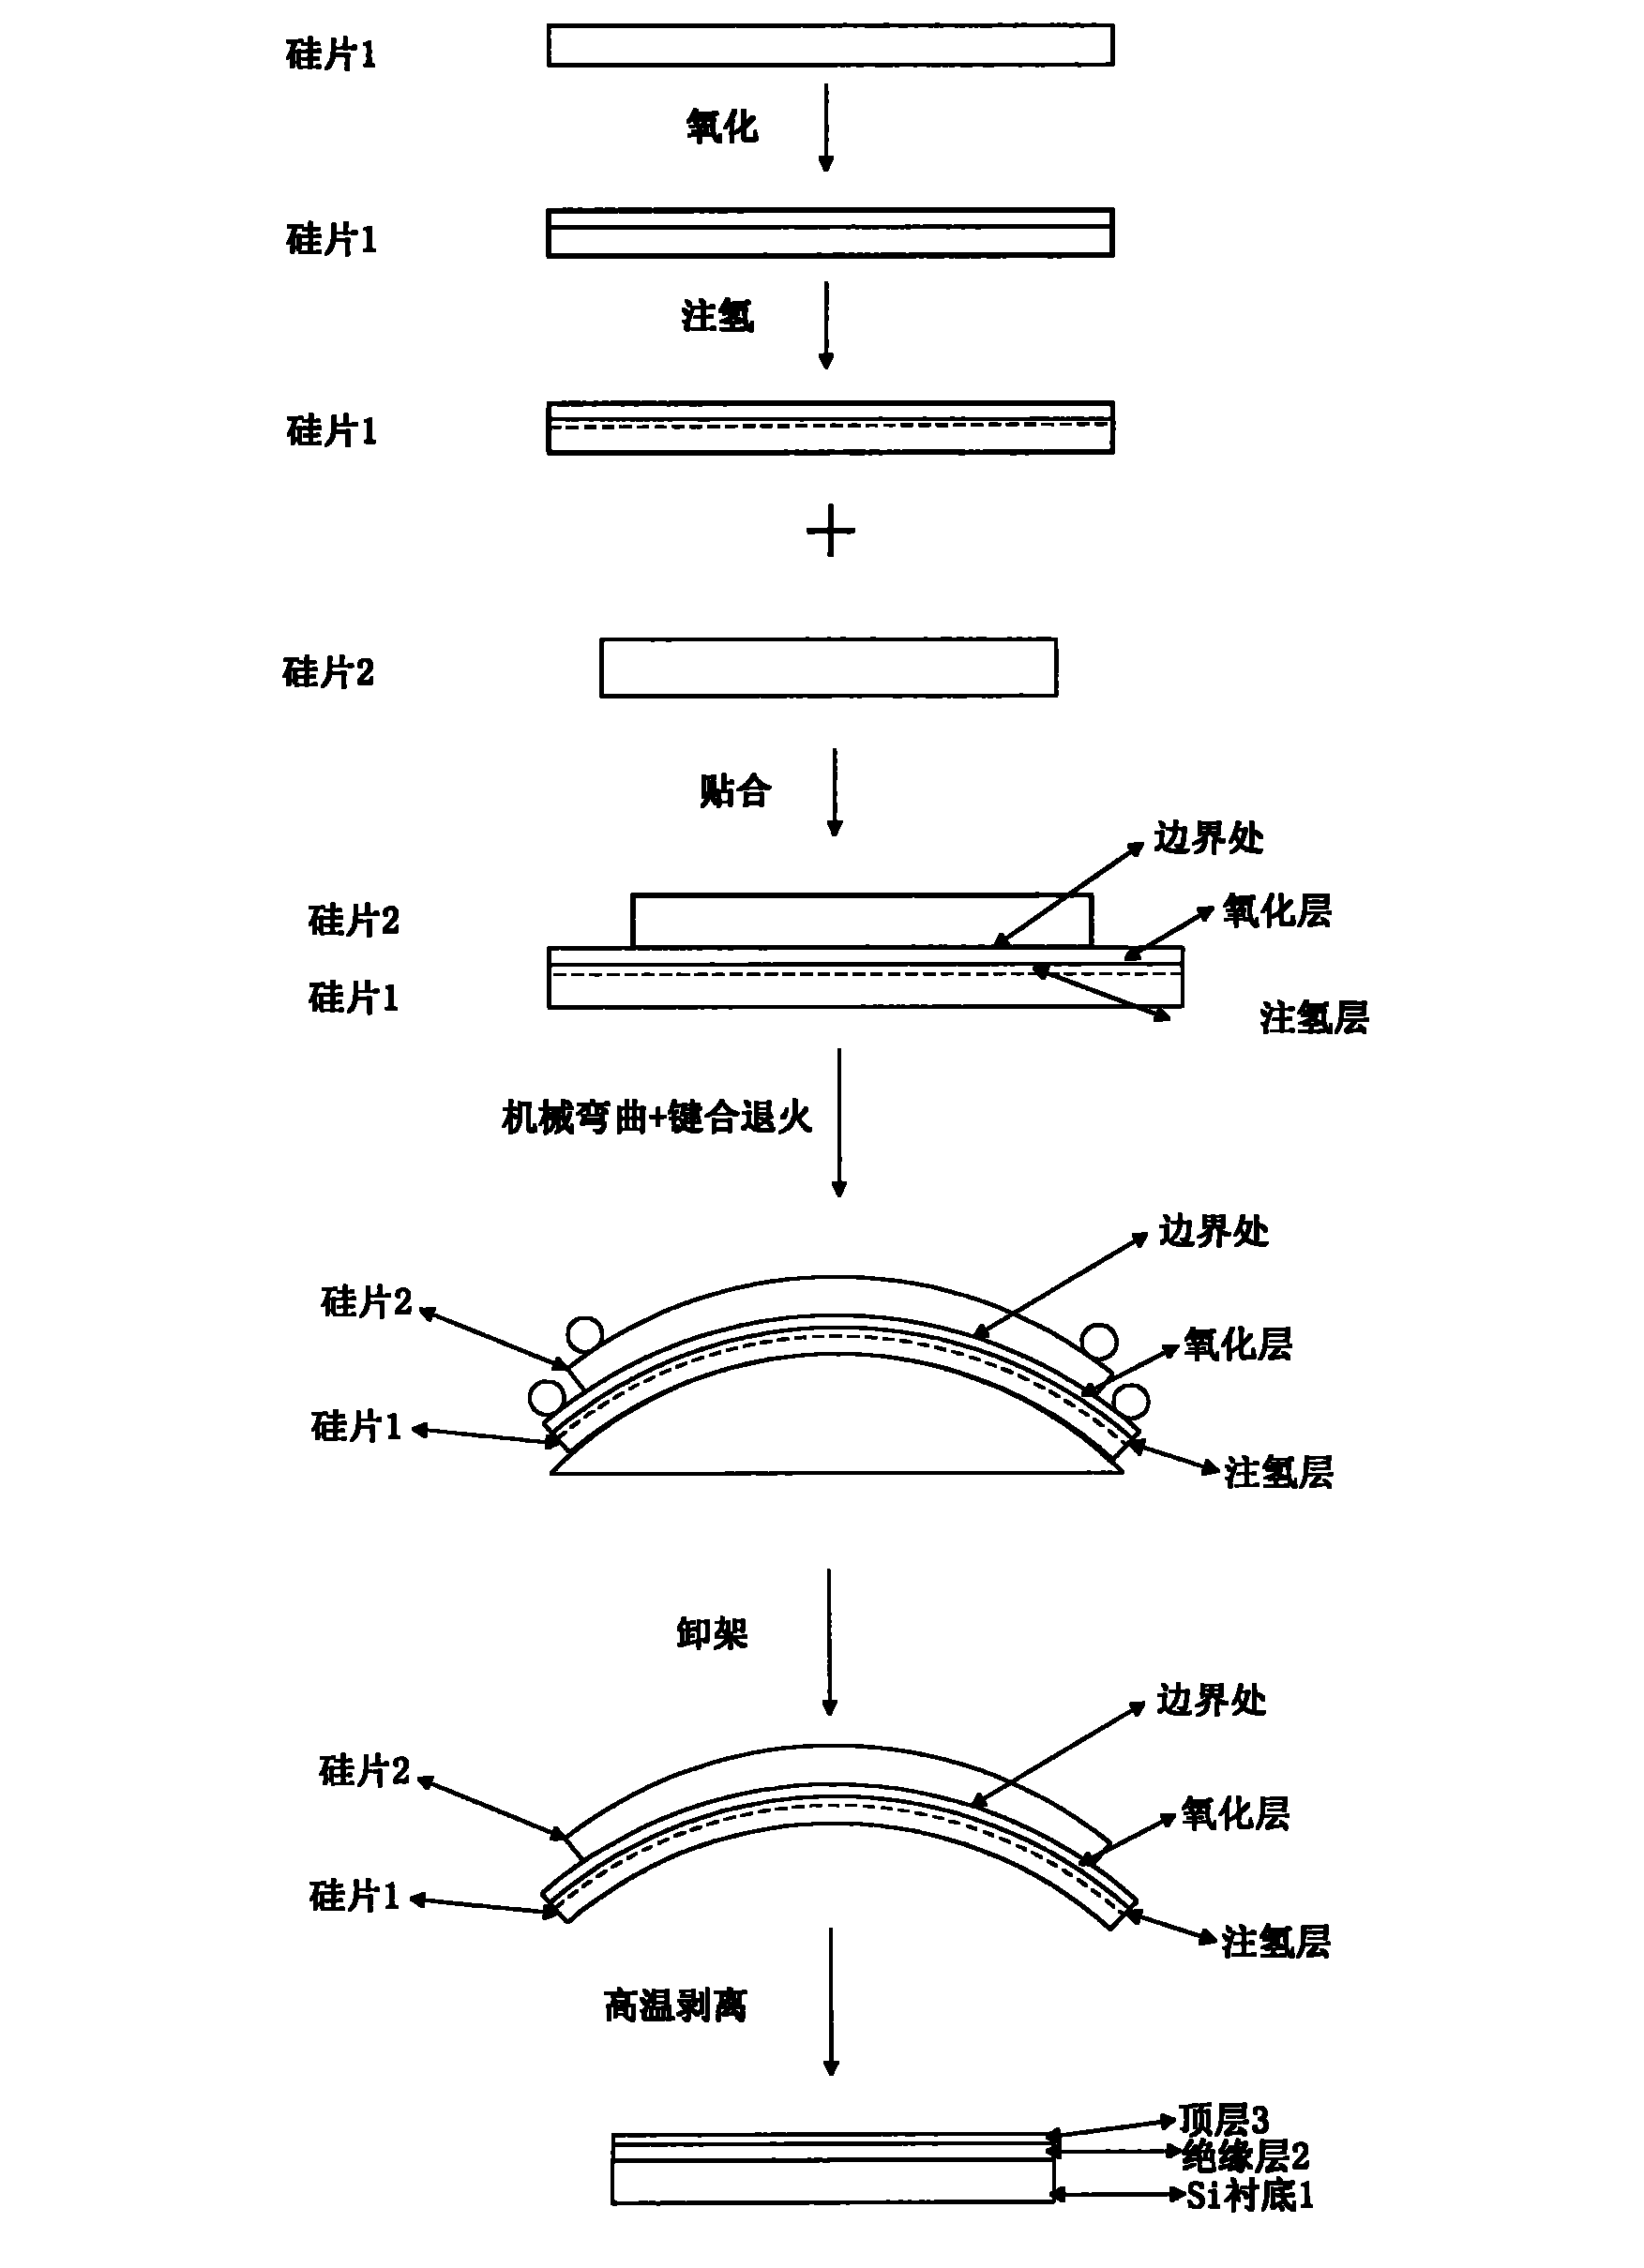 Manufacturing method of mechanical uniaxial strain GeOI (germanium-on-insulator) wafer based on SiN buried insulating layer